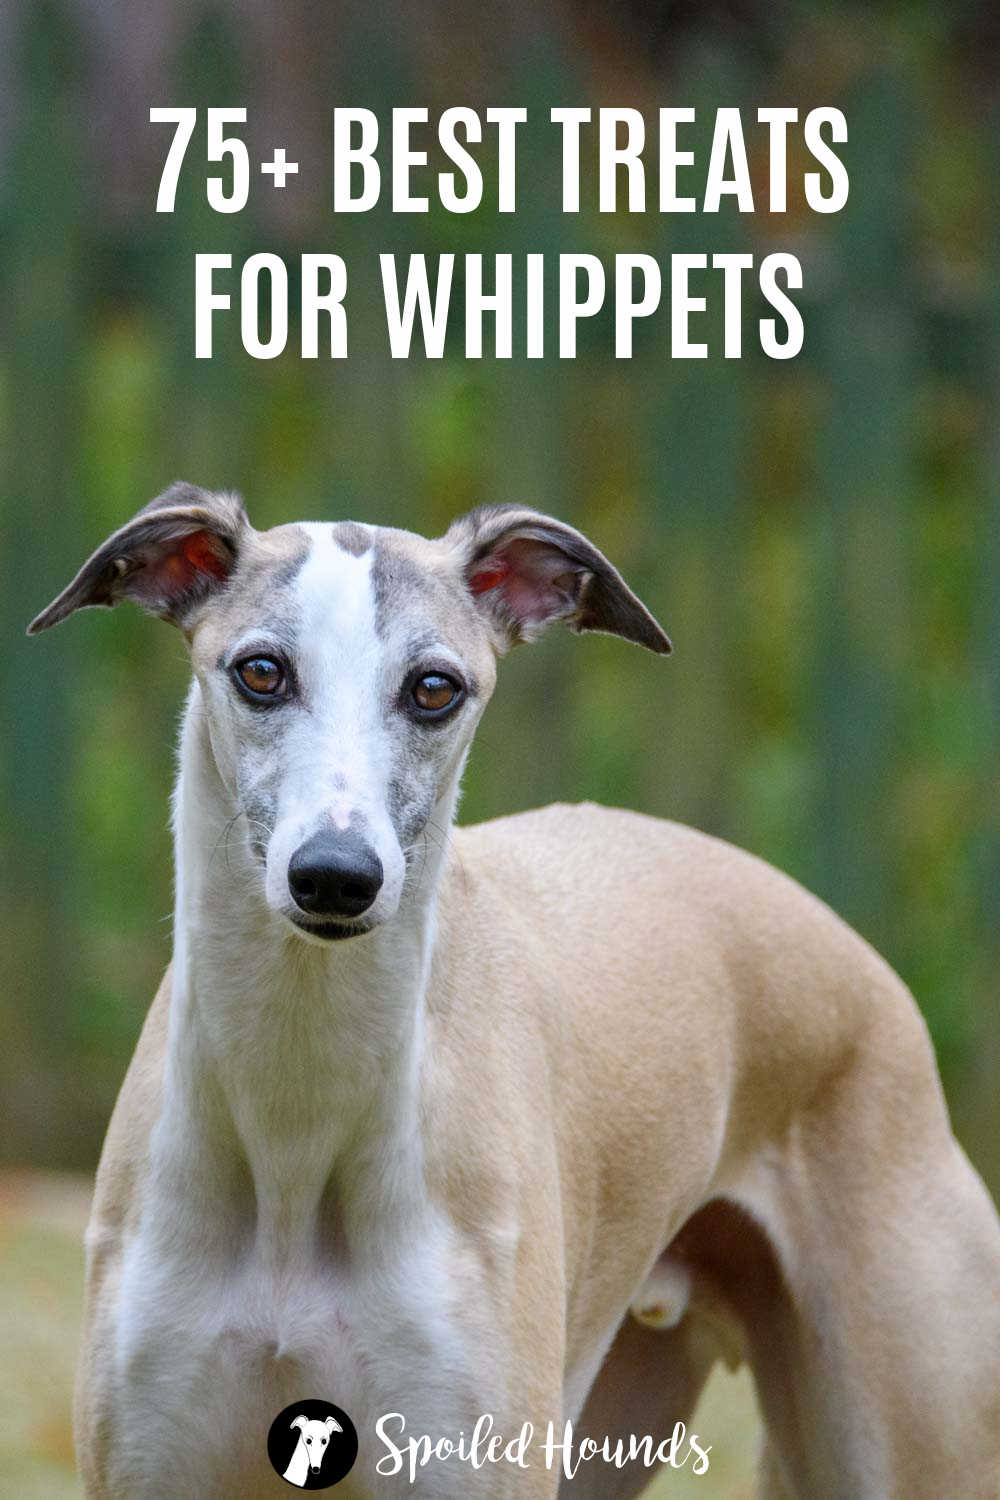 fawn colored whippet dog.